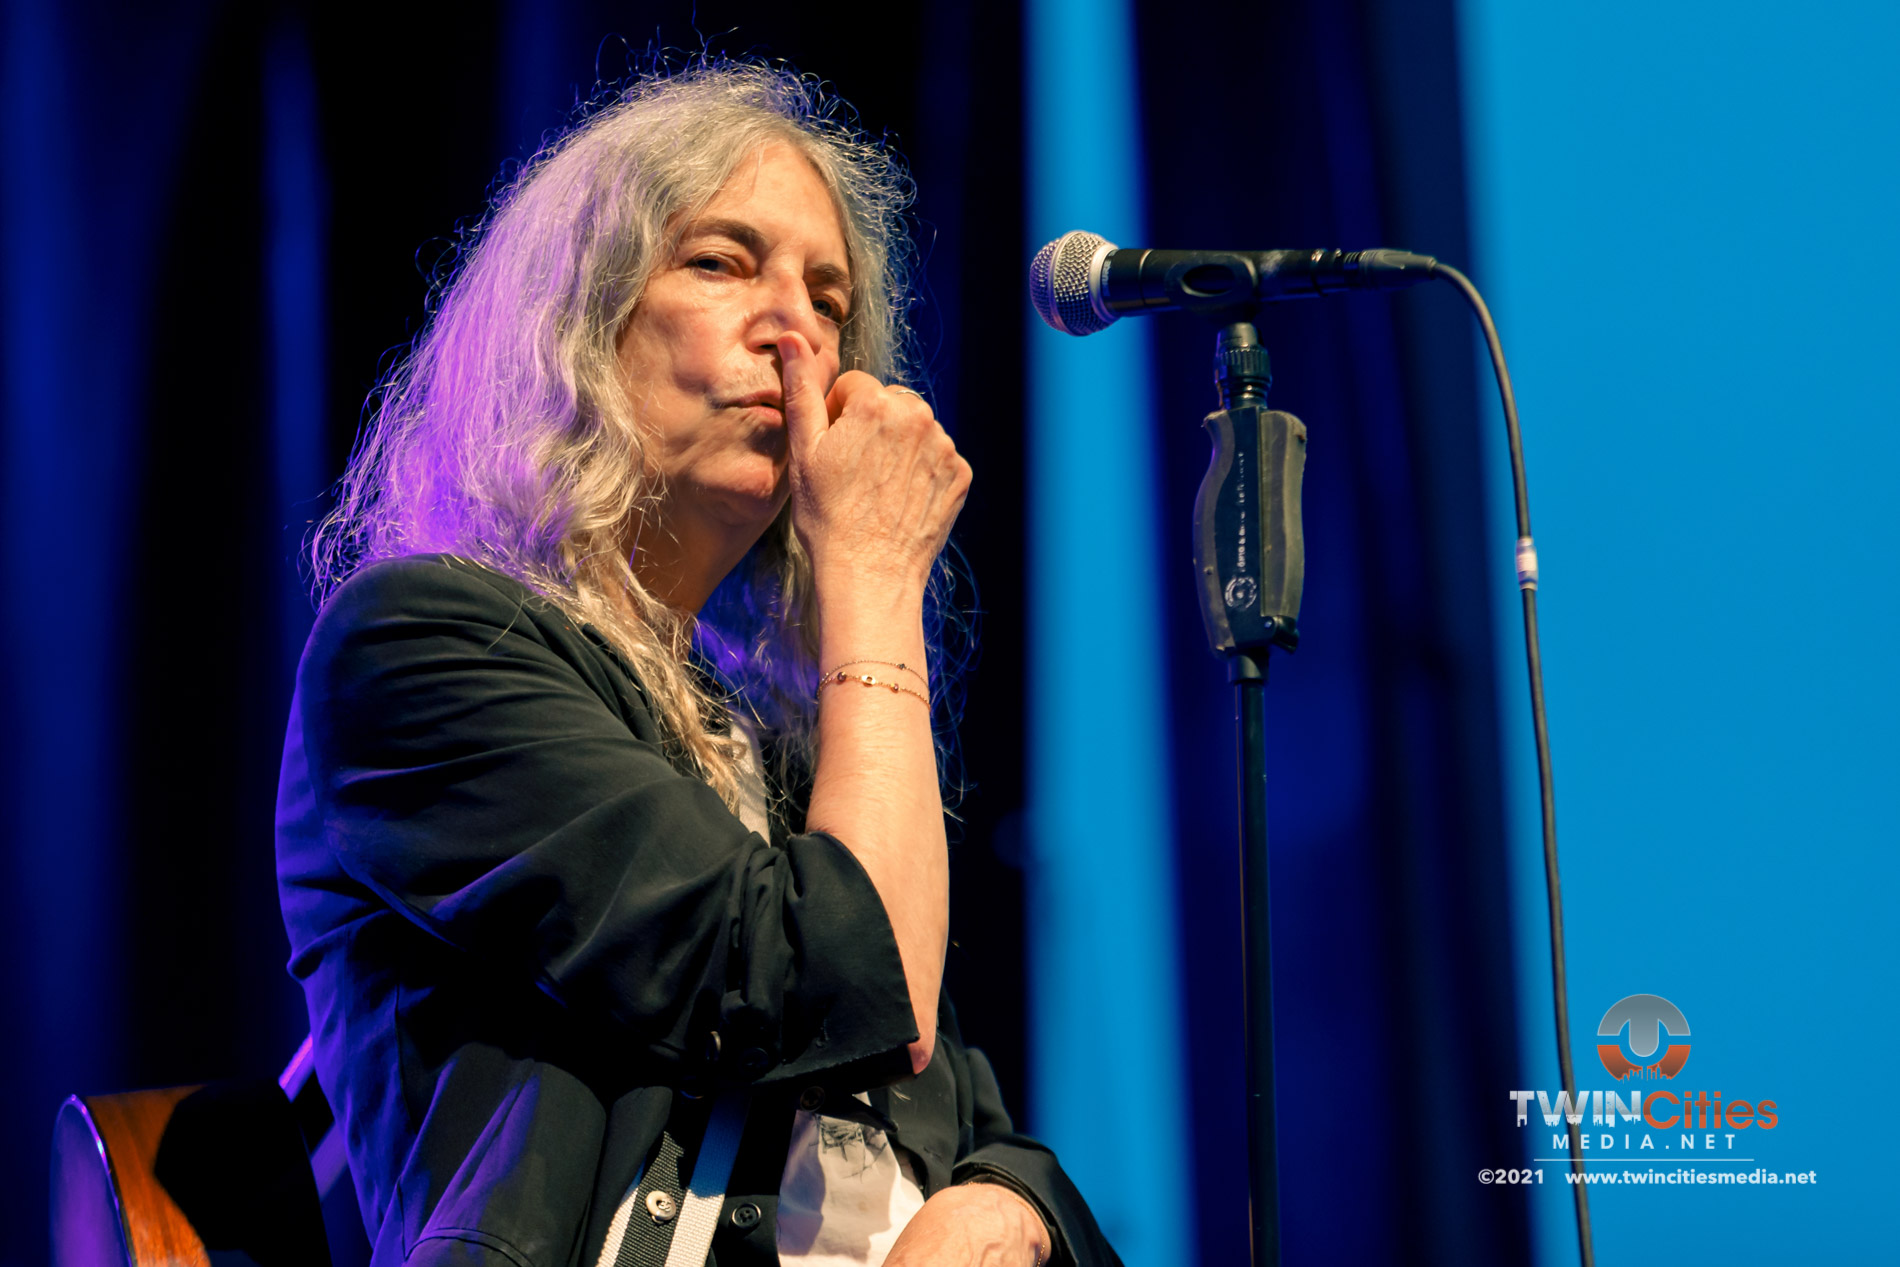 August 7, 2021 - Minneapolis, Minnesota, United States - Patti Smith And Her Band live in concert at Surly Brewing Festival Field along with Gregory Alan Isakov as the opener.

(Photo by Seth Steffenhagen/Steffenhagen Photography)